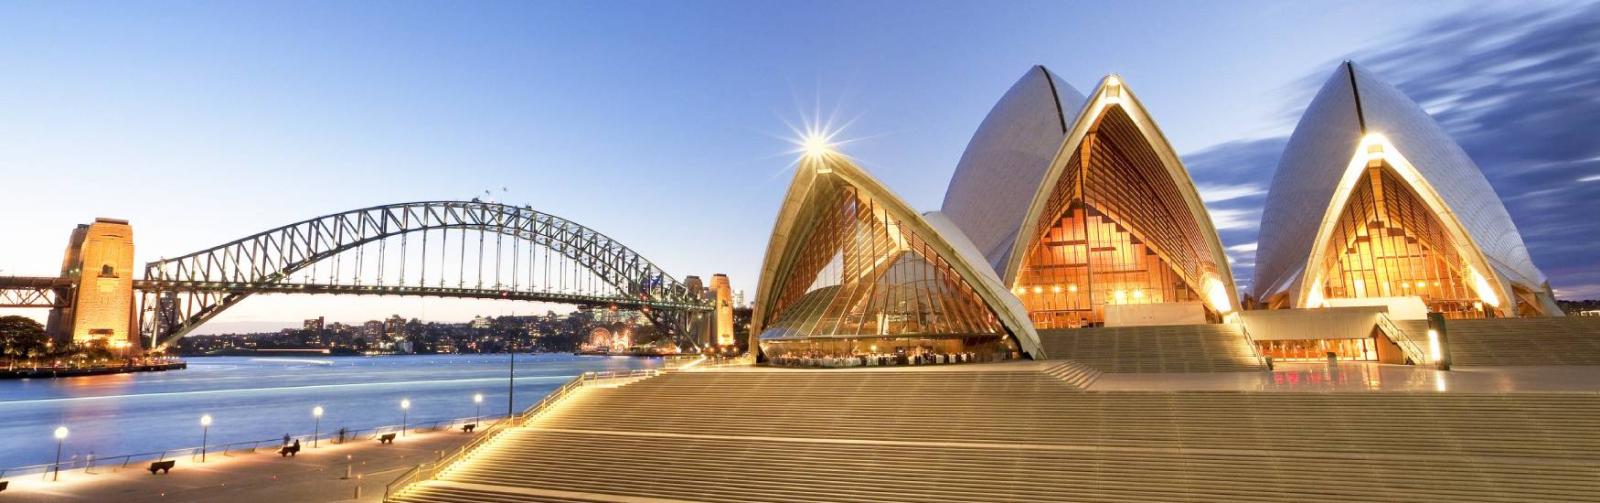 Sydney and Coastal Queensland Vacation Package Itinerary